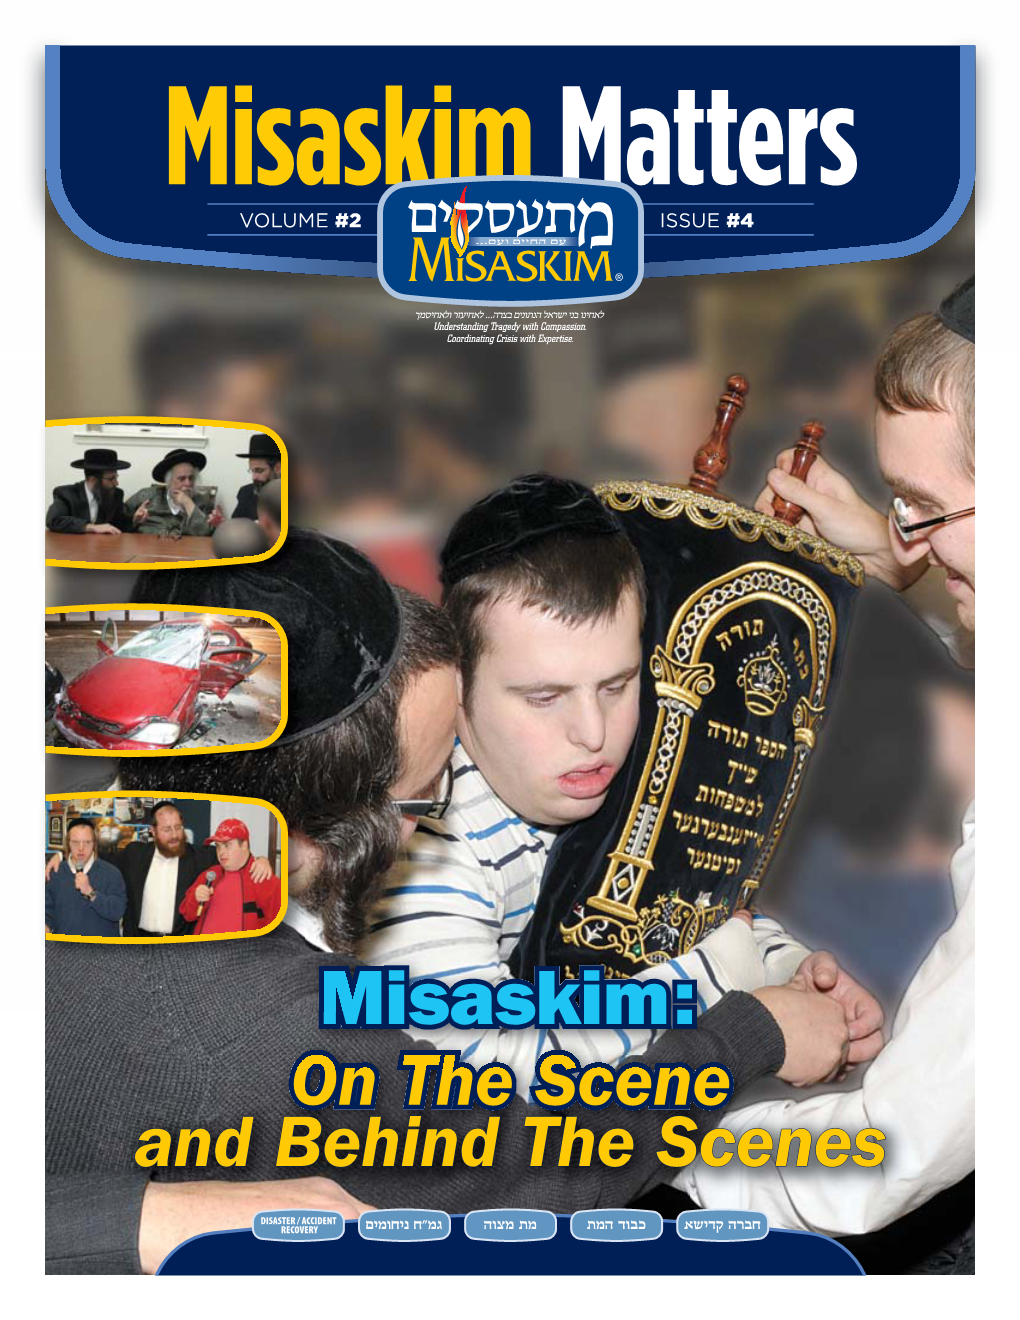 Misaskim: on the Scene Andandbehindthescenes Behind the Scenes Page 2 NOTHING TAKES PRECEDENCE OVER MES MITZVAH